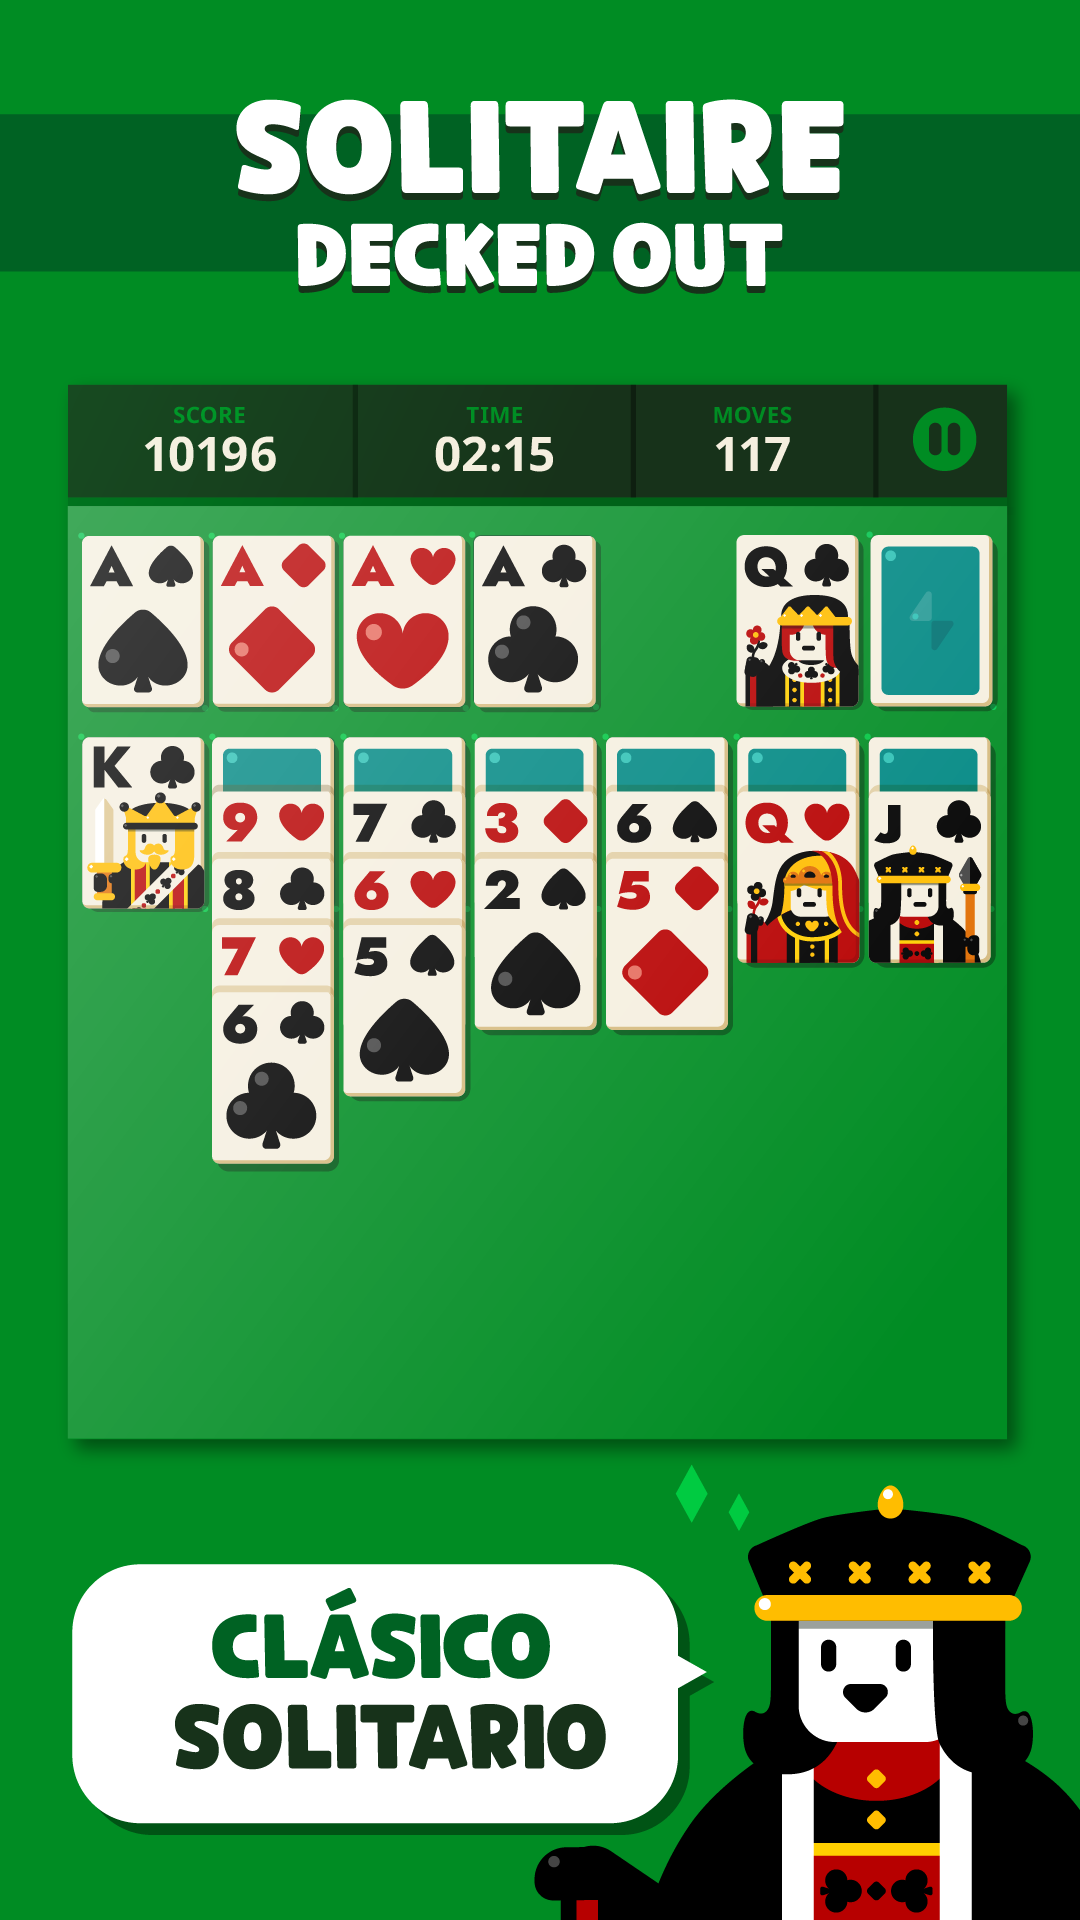 Screenshot 1 of Solitaire: Decked Out 1.7.1